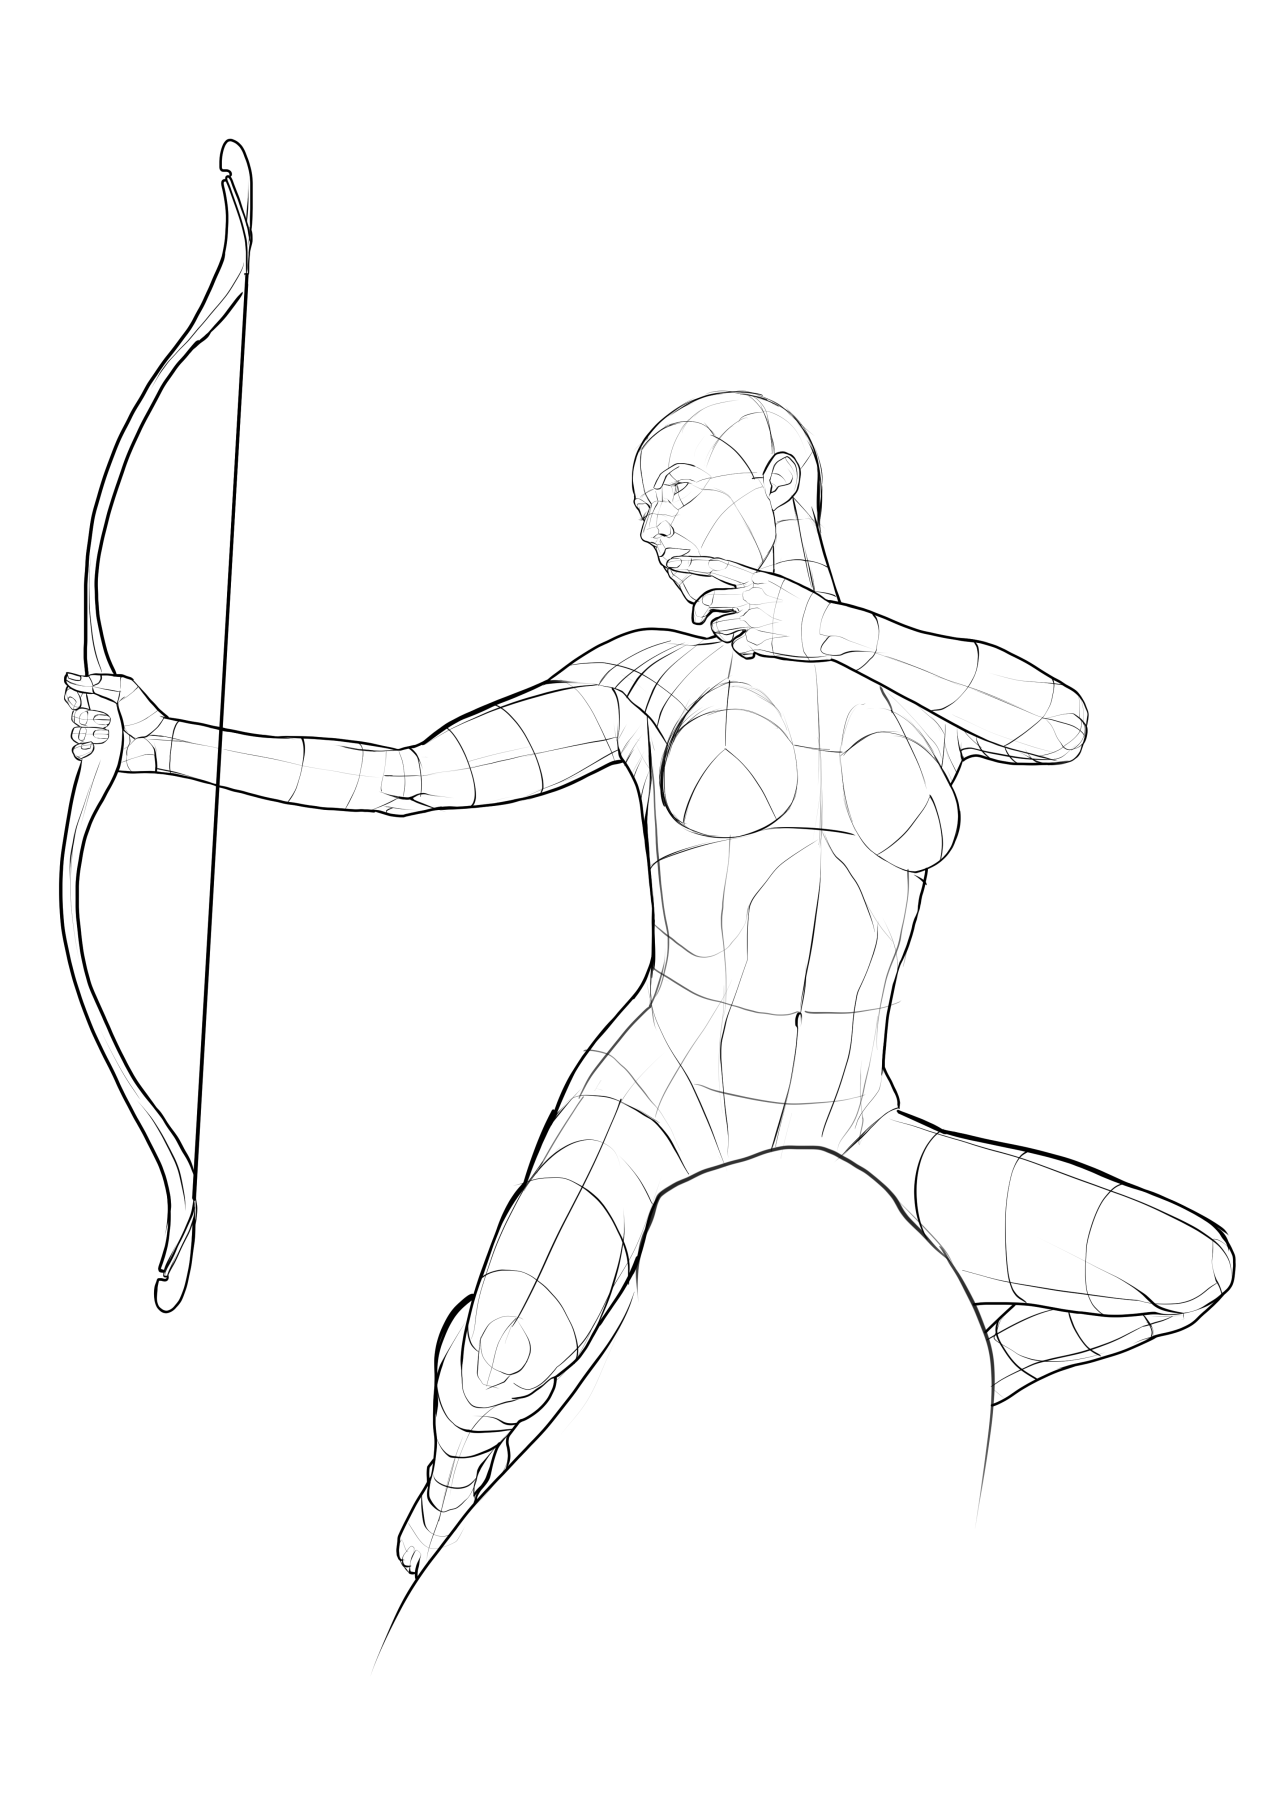 Archer pose reference for drawing | Art reference, Drawing reference poses,  Art reference poses